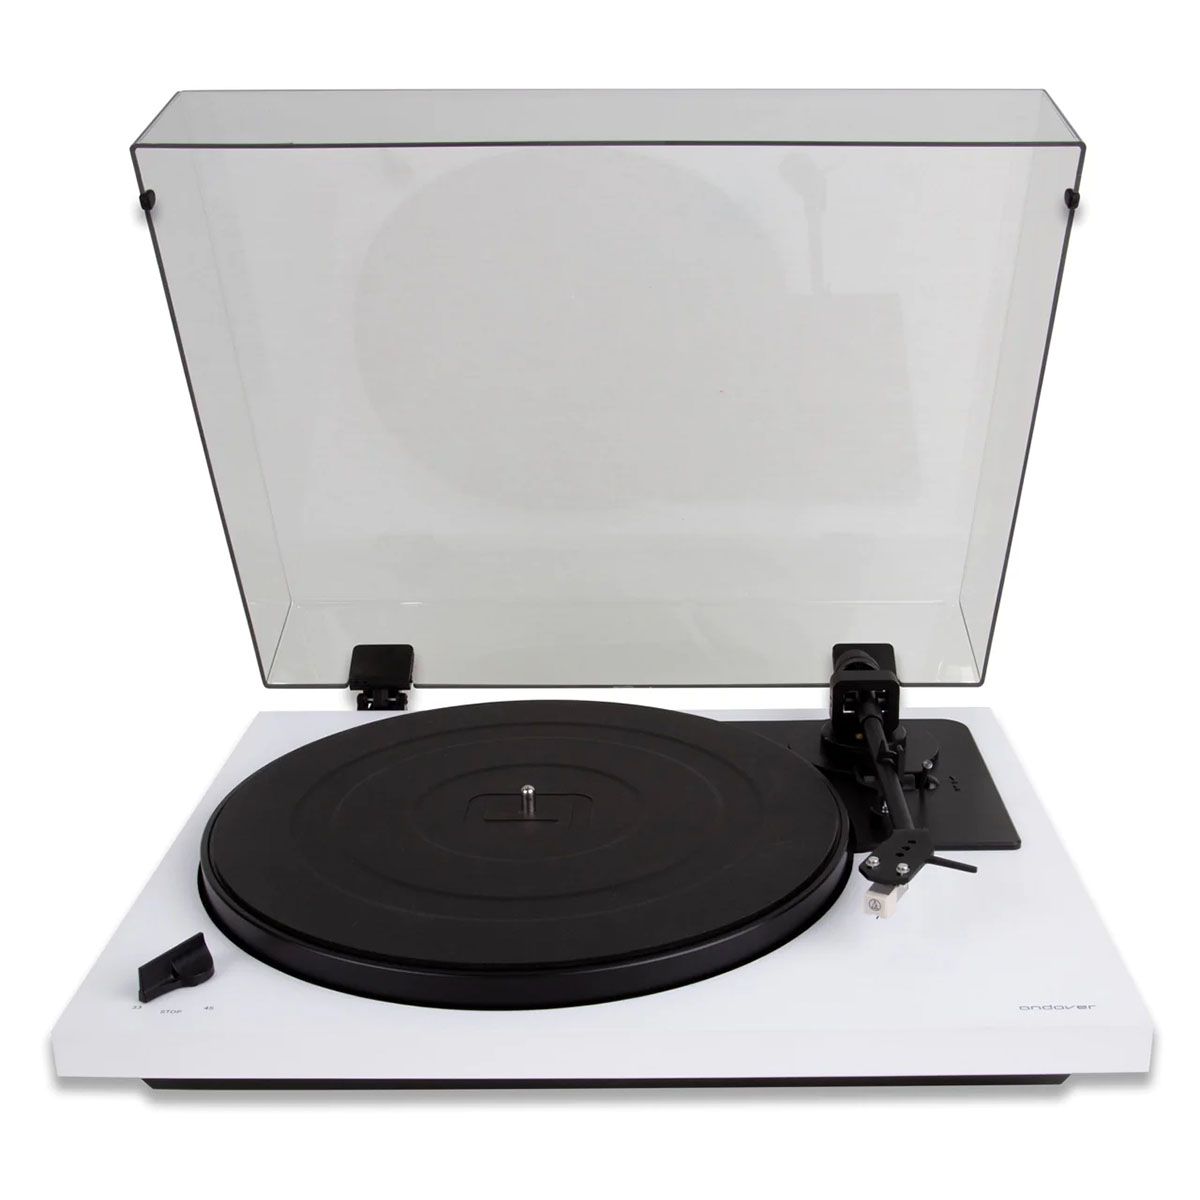 Andover Audio SpinDeck 2 Semi-Automatic Turntable - white with open dustcover, angled front view